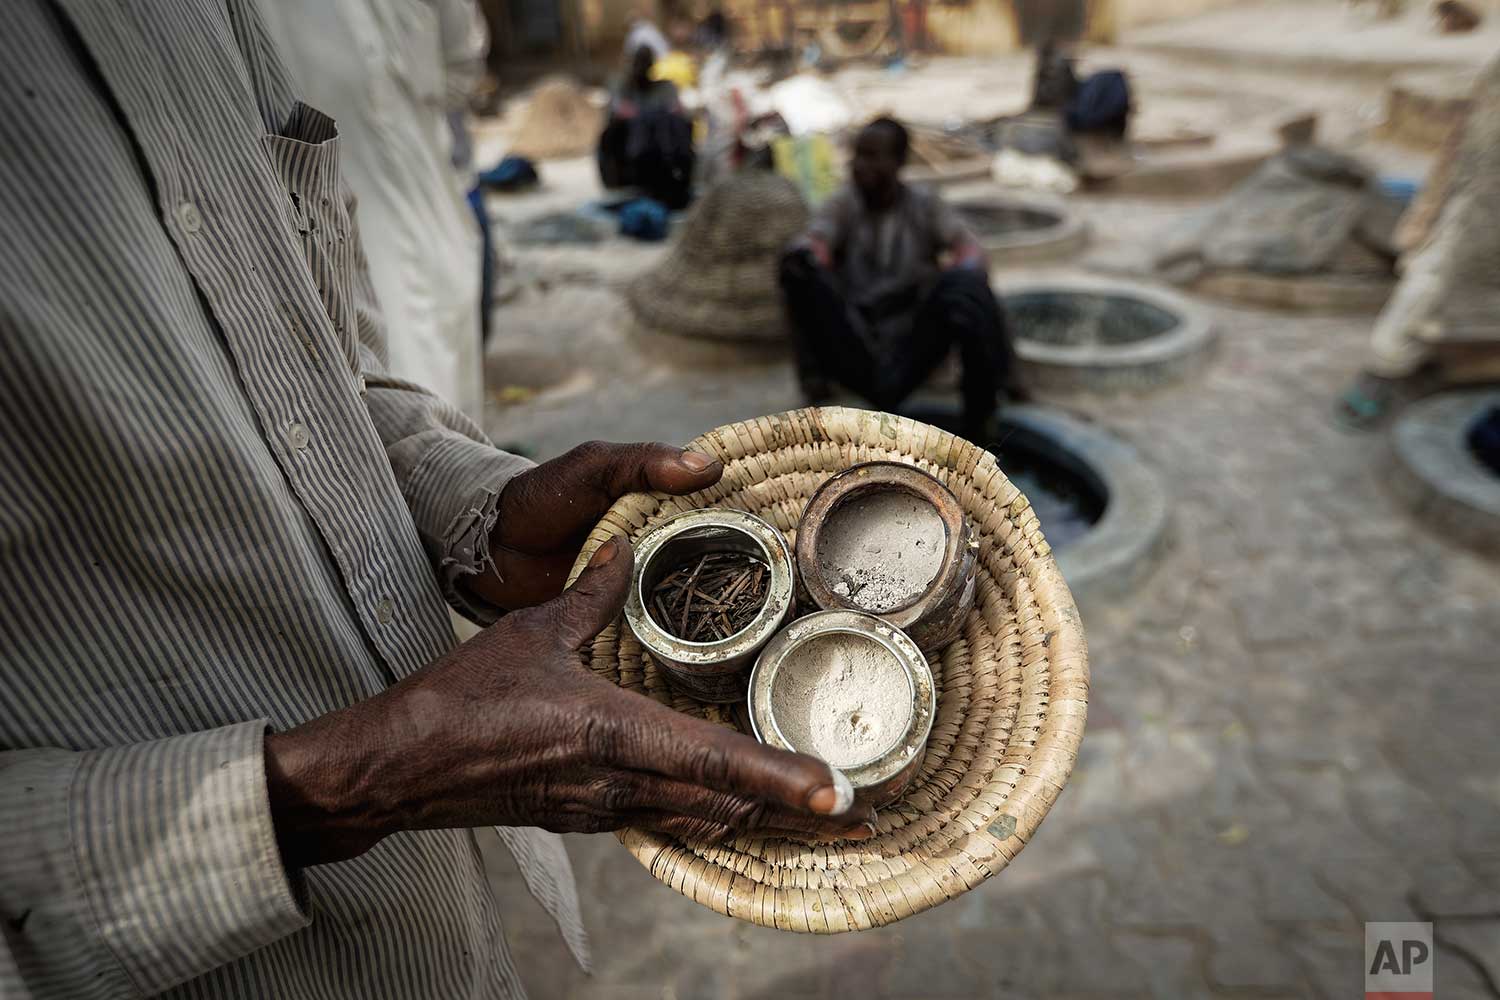  In this photo taken Tuesday, Feb. 19, 2019, a craftsman carries some of the ingredients used to make indigo dye, at the ancient dye pits of Kofar Mata in Kano, northern Nigeria. (AP Photo/Ben Curtis) 